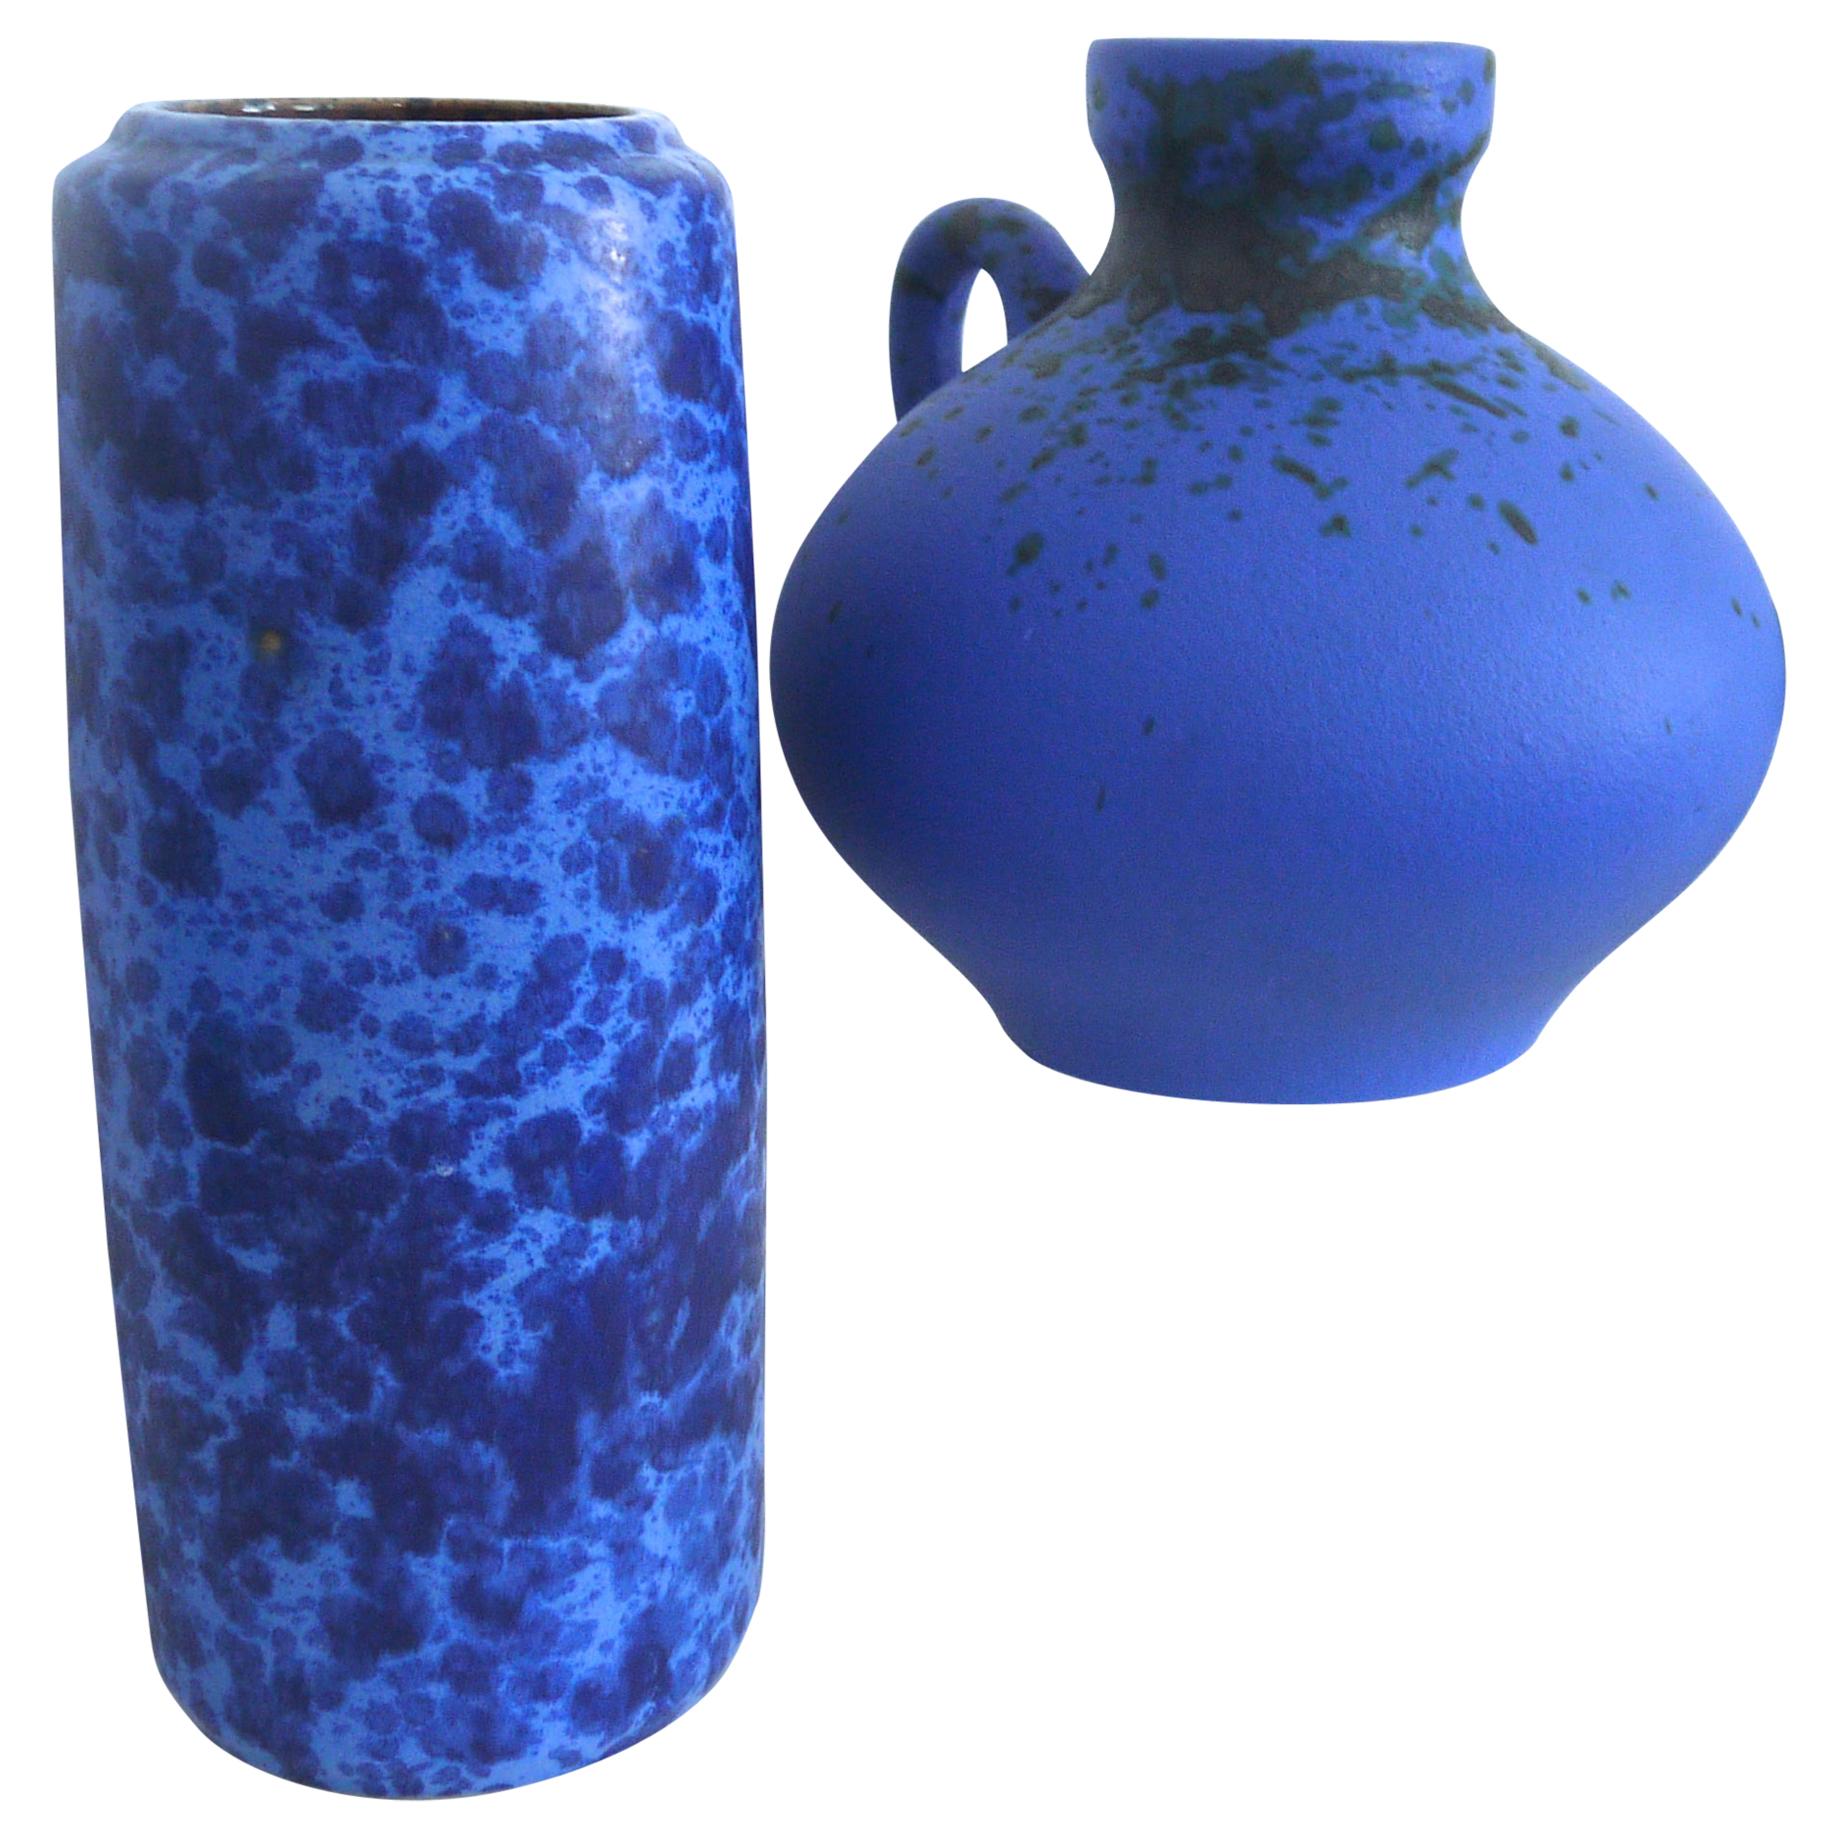 Handmade Studio Vase by Pottery Hartwig Heyne Also Known as Hoy Pottery, 1960s For Sale